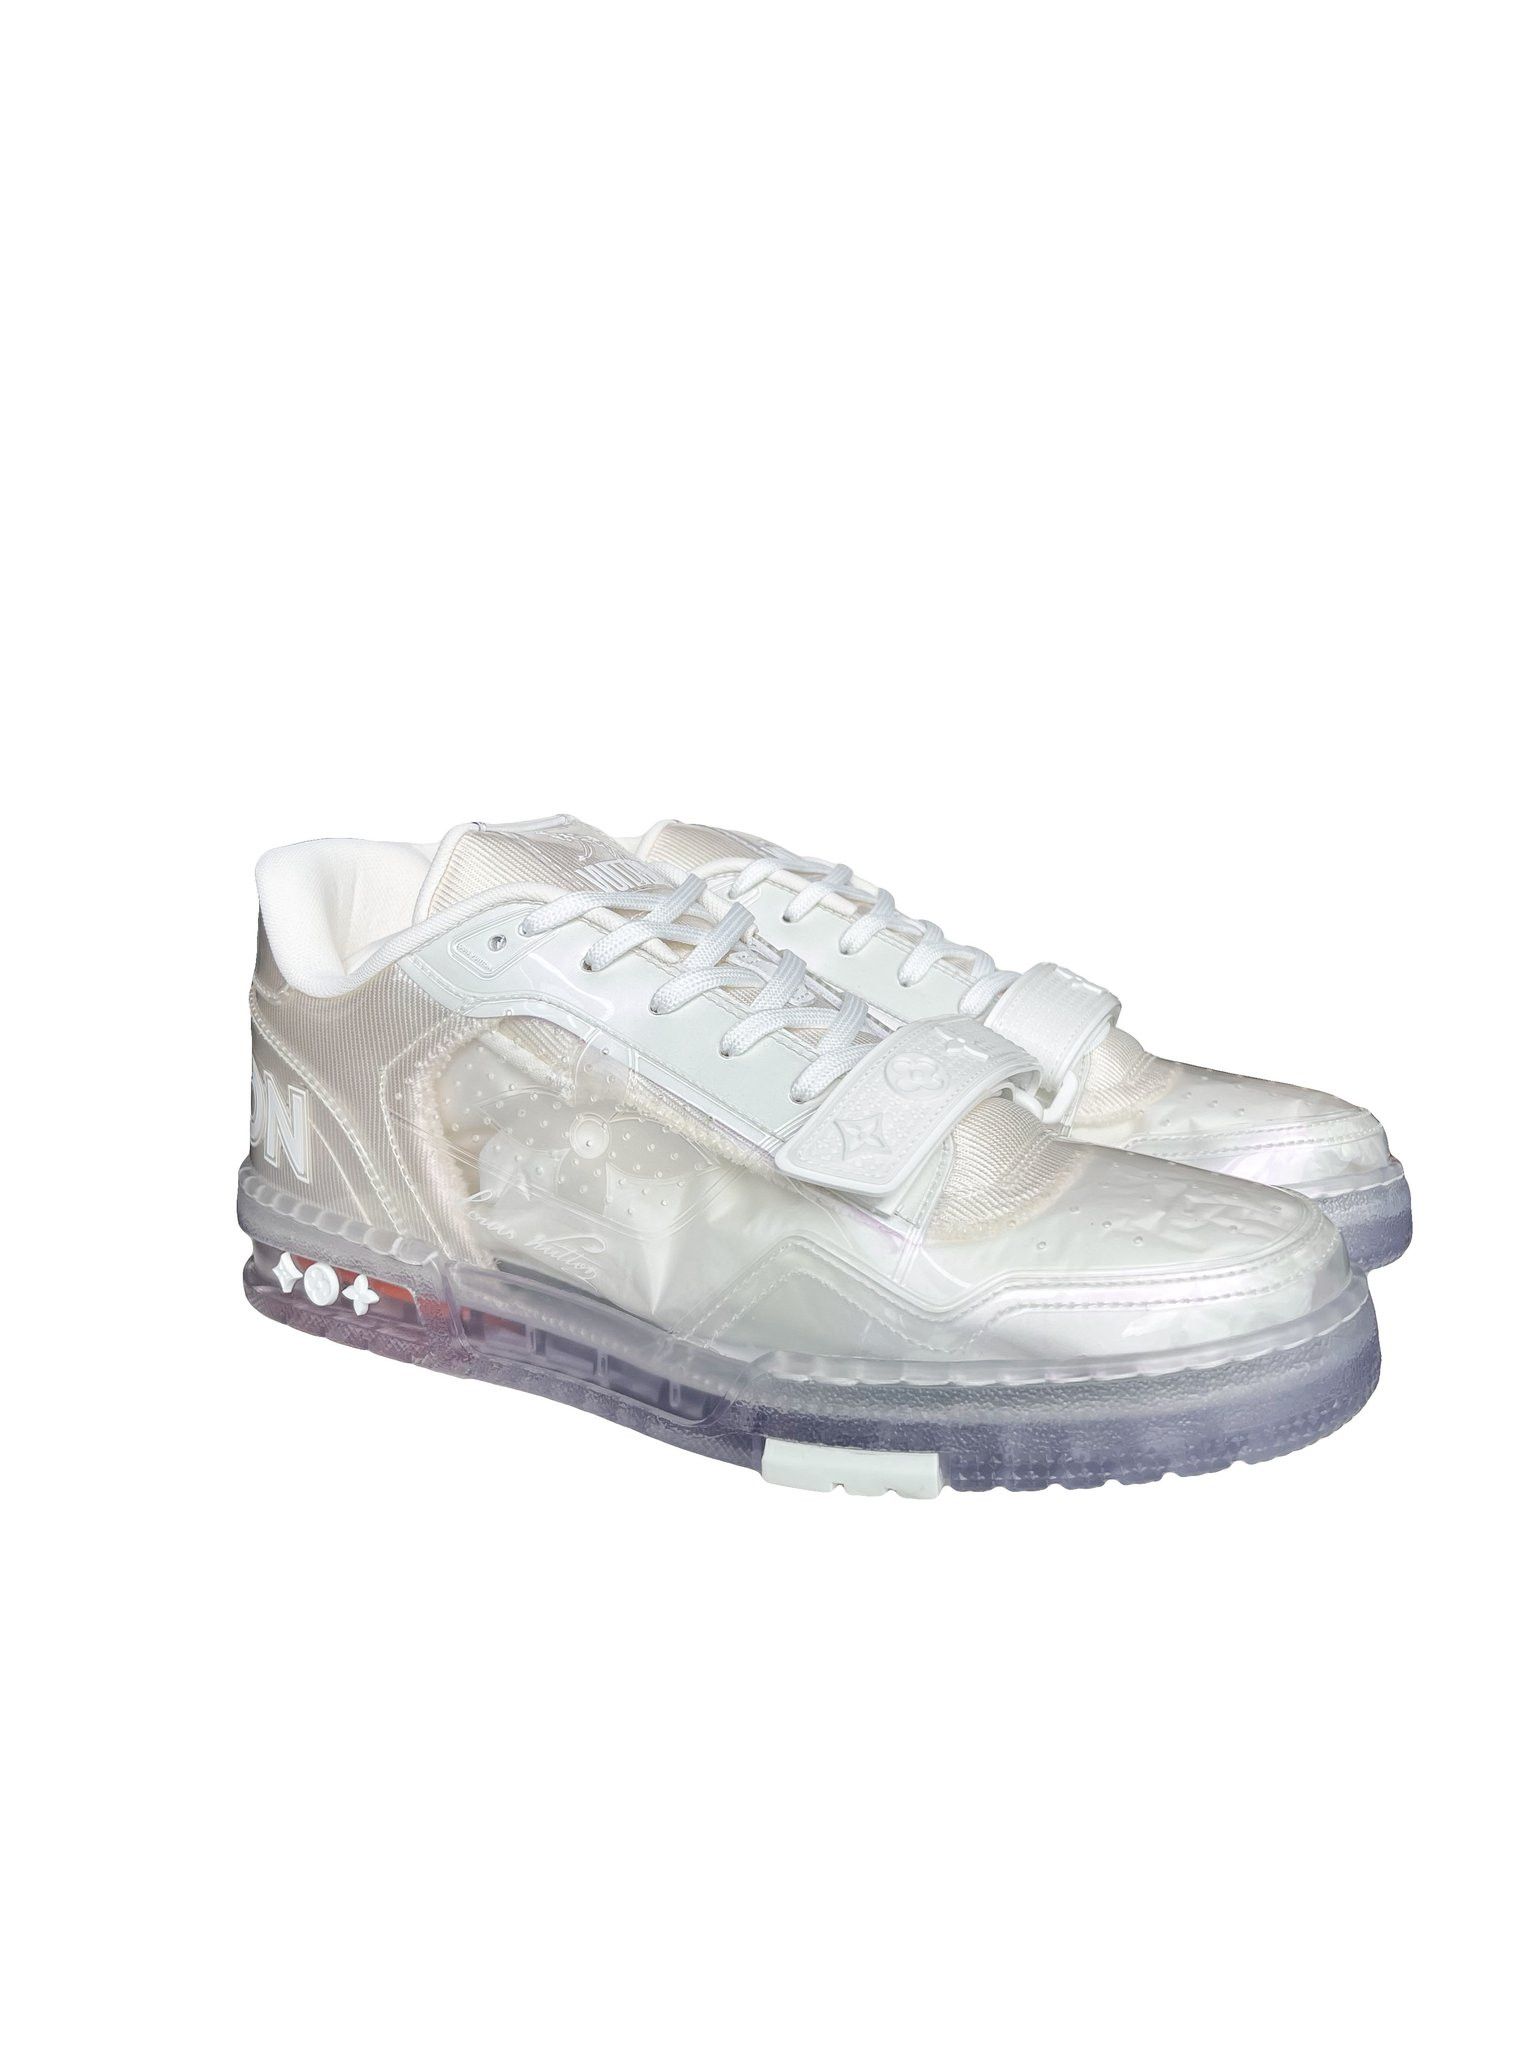 Louis Vuitton LV Trainer Transparent Sneakers - Clear Sneakers, Shoes -  LOU766039